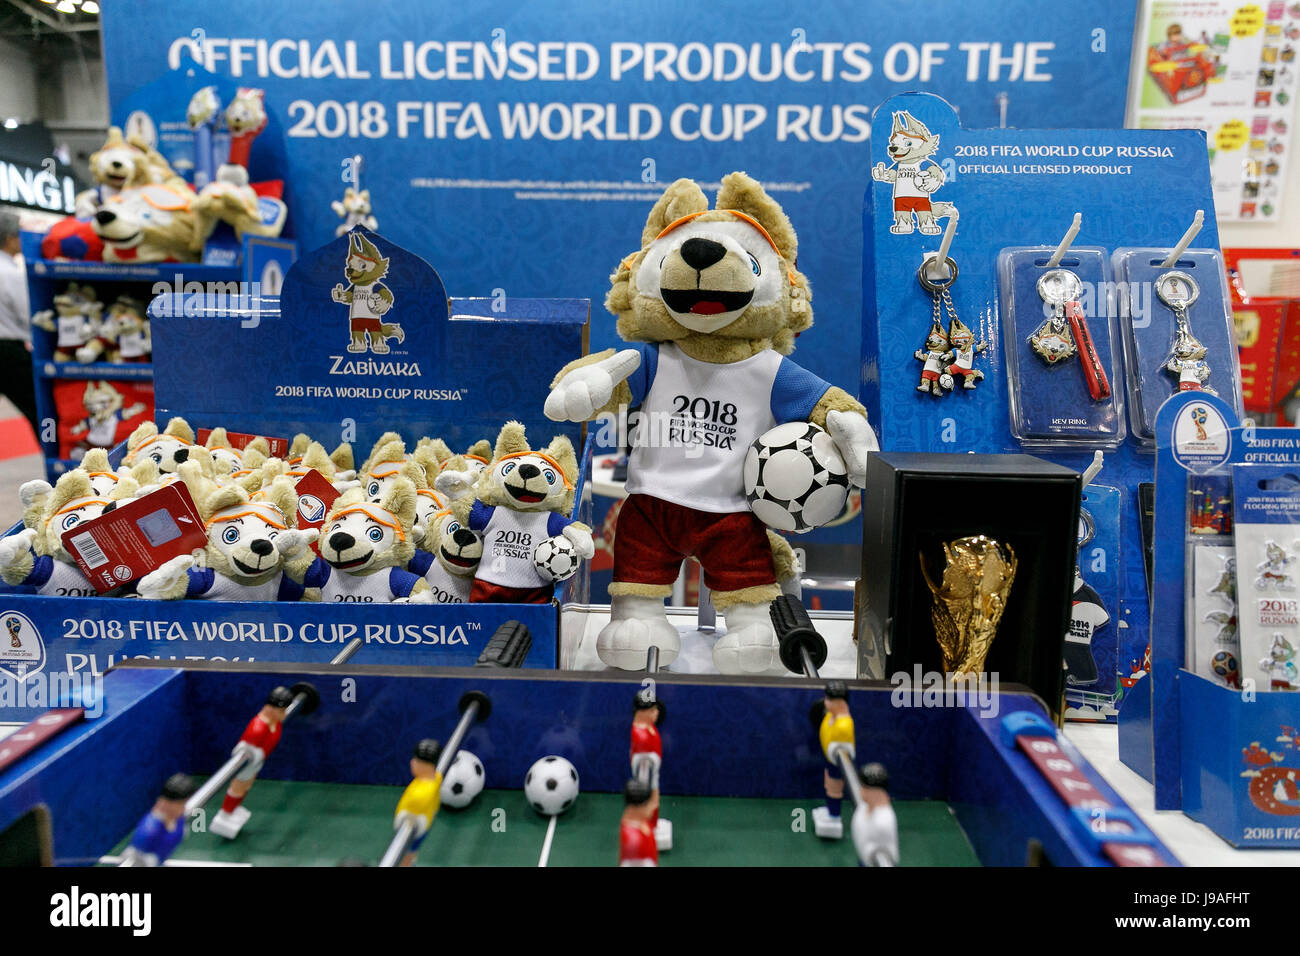 Samples of 2018 FIFA World Cup Russia toys on display at the International Tokyo Toy Show 2017 in Tokyo Big Sight on June 1, 2017, Tokyo, Japan. Japan's biggest exhibition for the toy industry showcases some 35,000 toys from 153 toy makers from Japan and overseas. The show runs from June 1st to 4th. Credit: Rodrigo Reyes Marin/AFLO/Alamy Live News Stock Photo